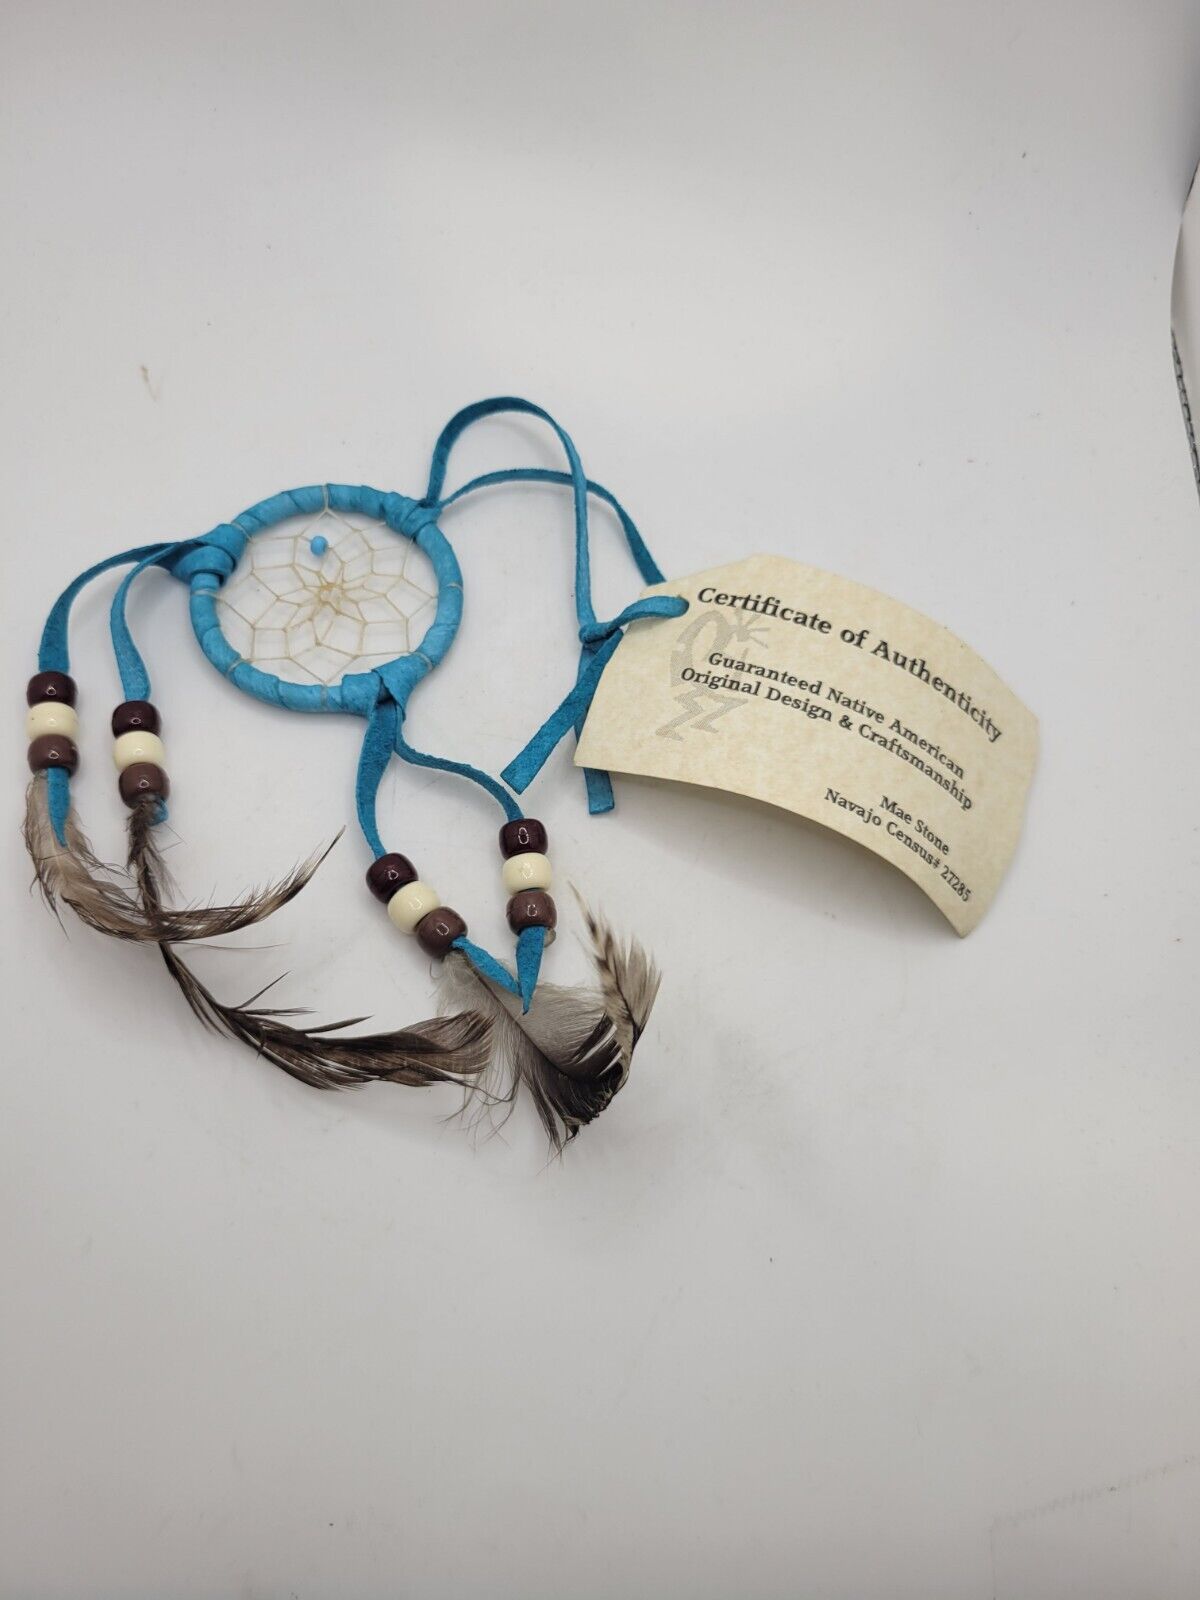 Vintage Navajo Dreamcatcher With Certificate Of Authenticity 